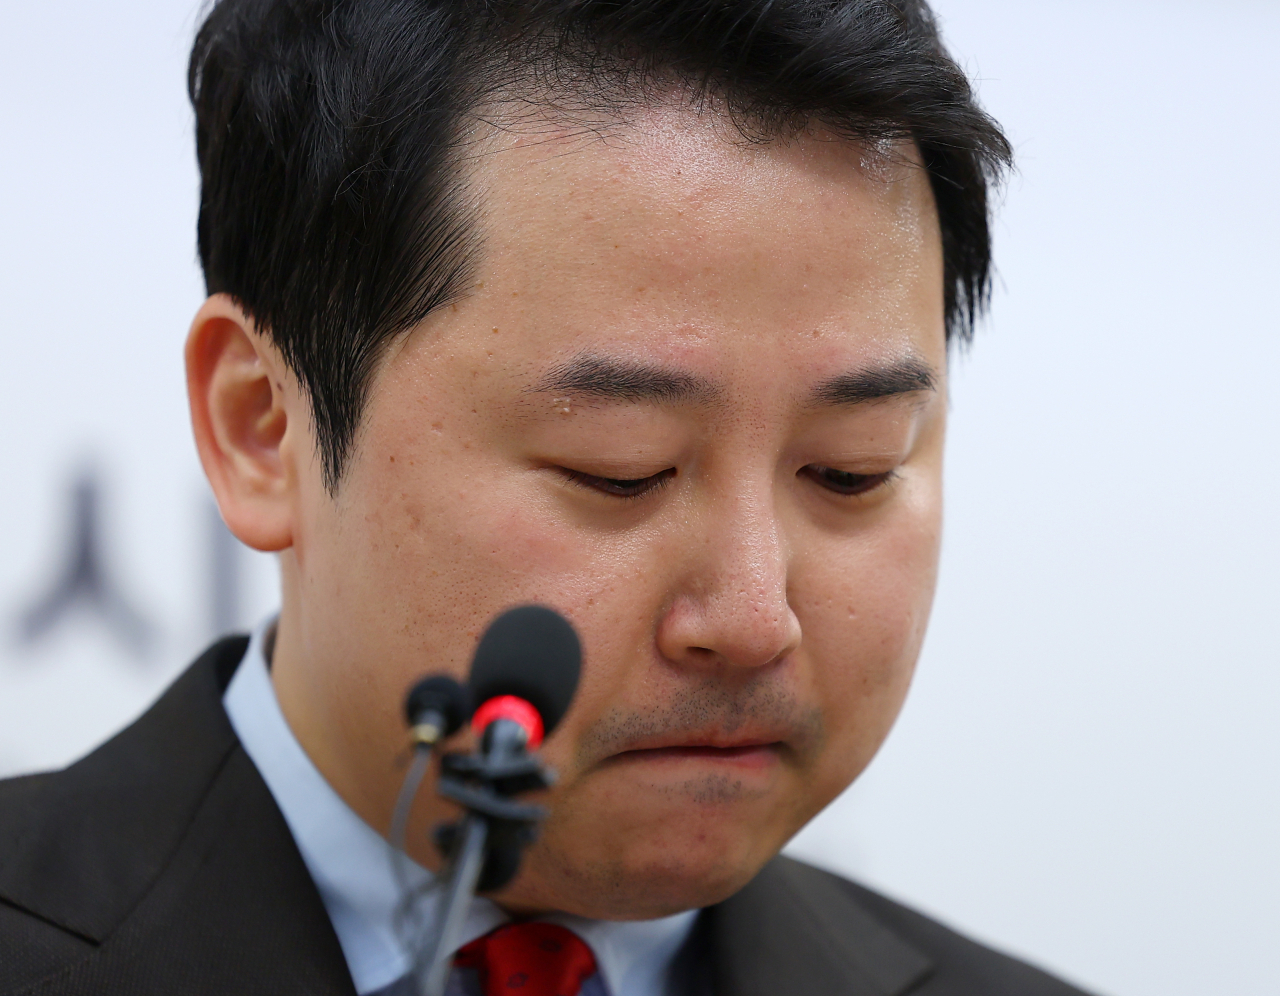 File photo shows Jang Ye-chan, a former Supreme Council member of the ruling People Power Party, who ran in the April 10 general elections as an independent lawmaker, speaking during a news conference on March 18. (Yonhap)